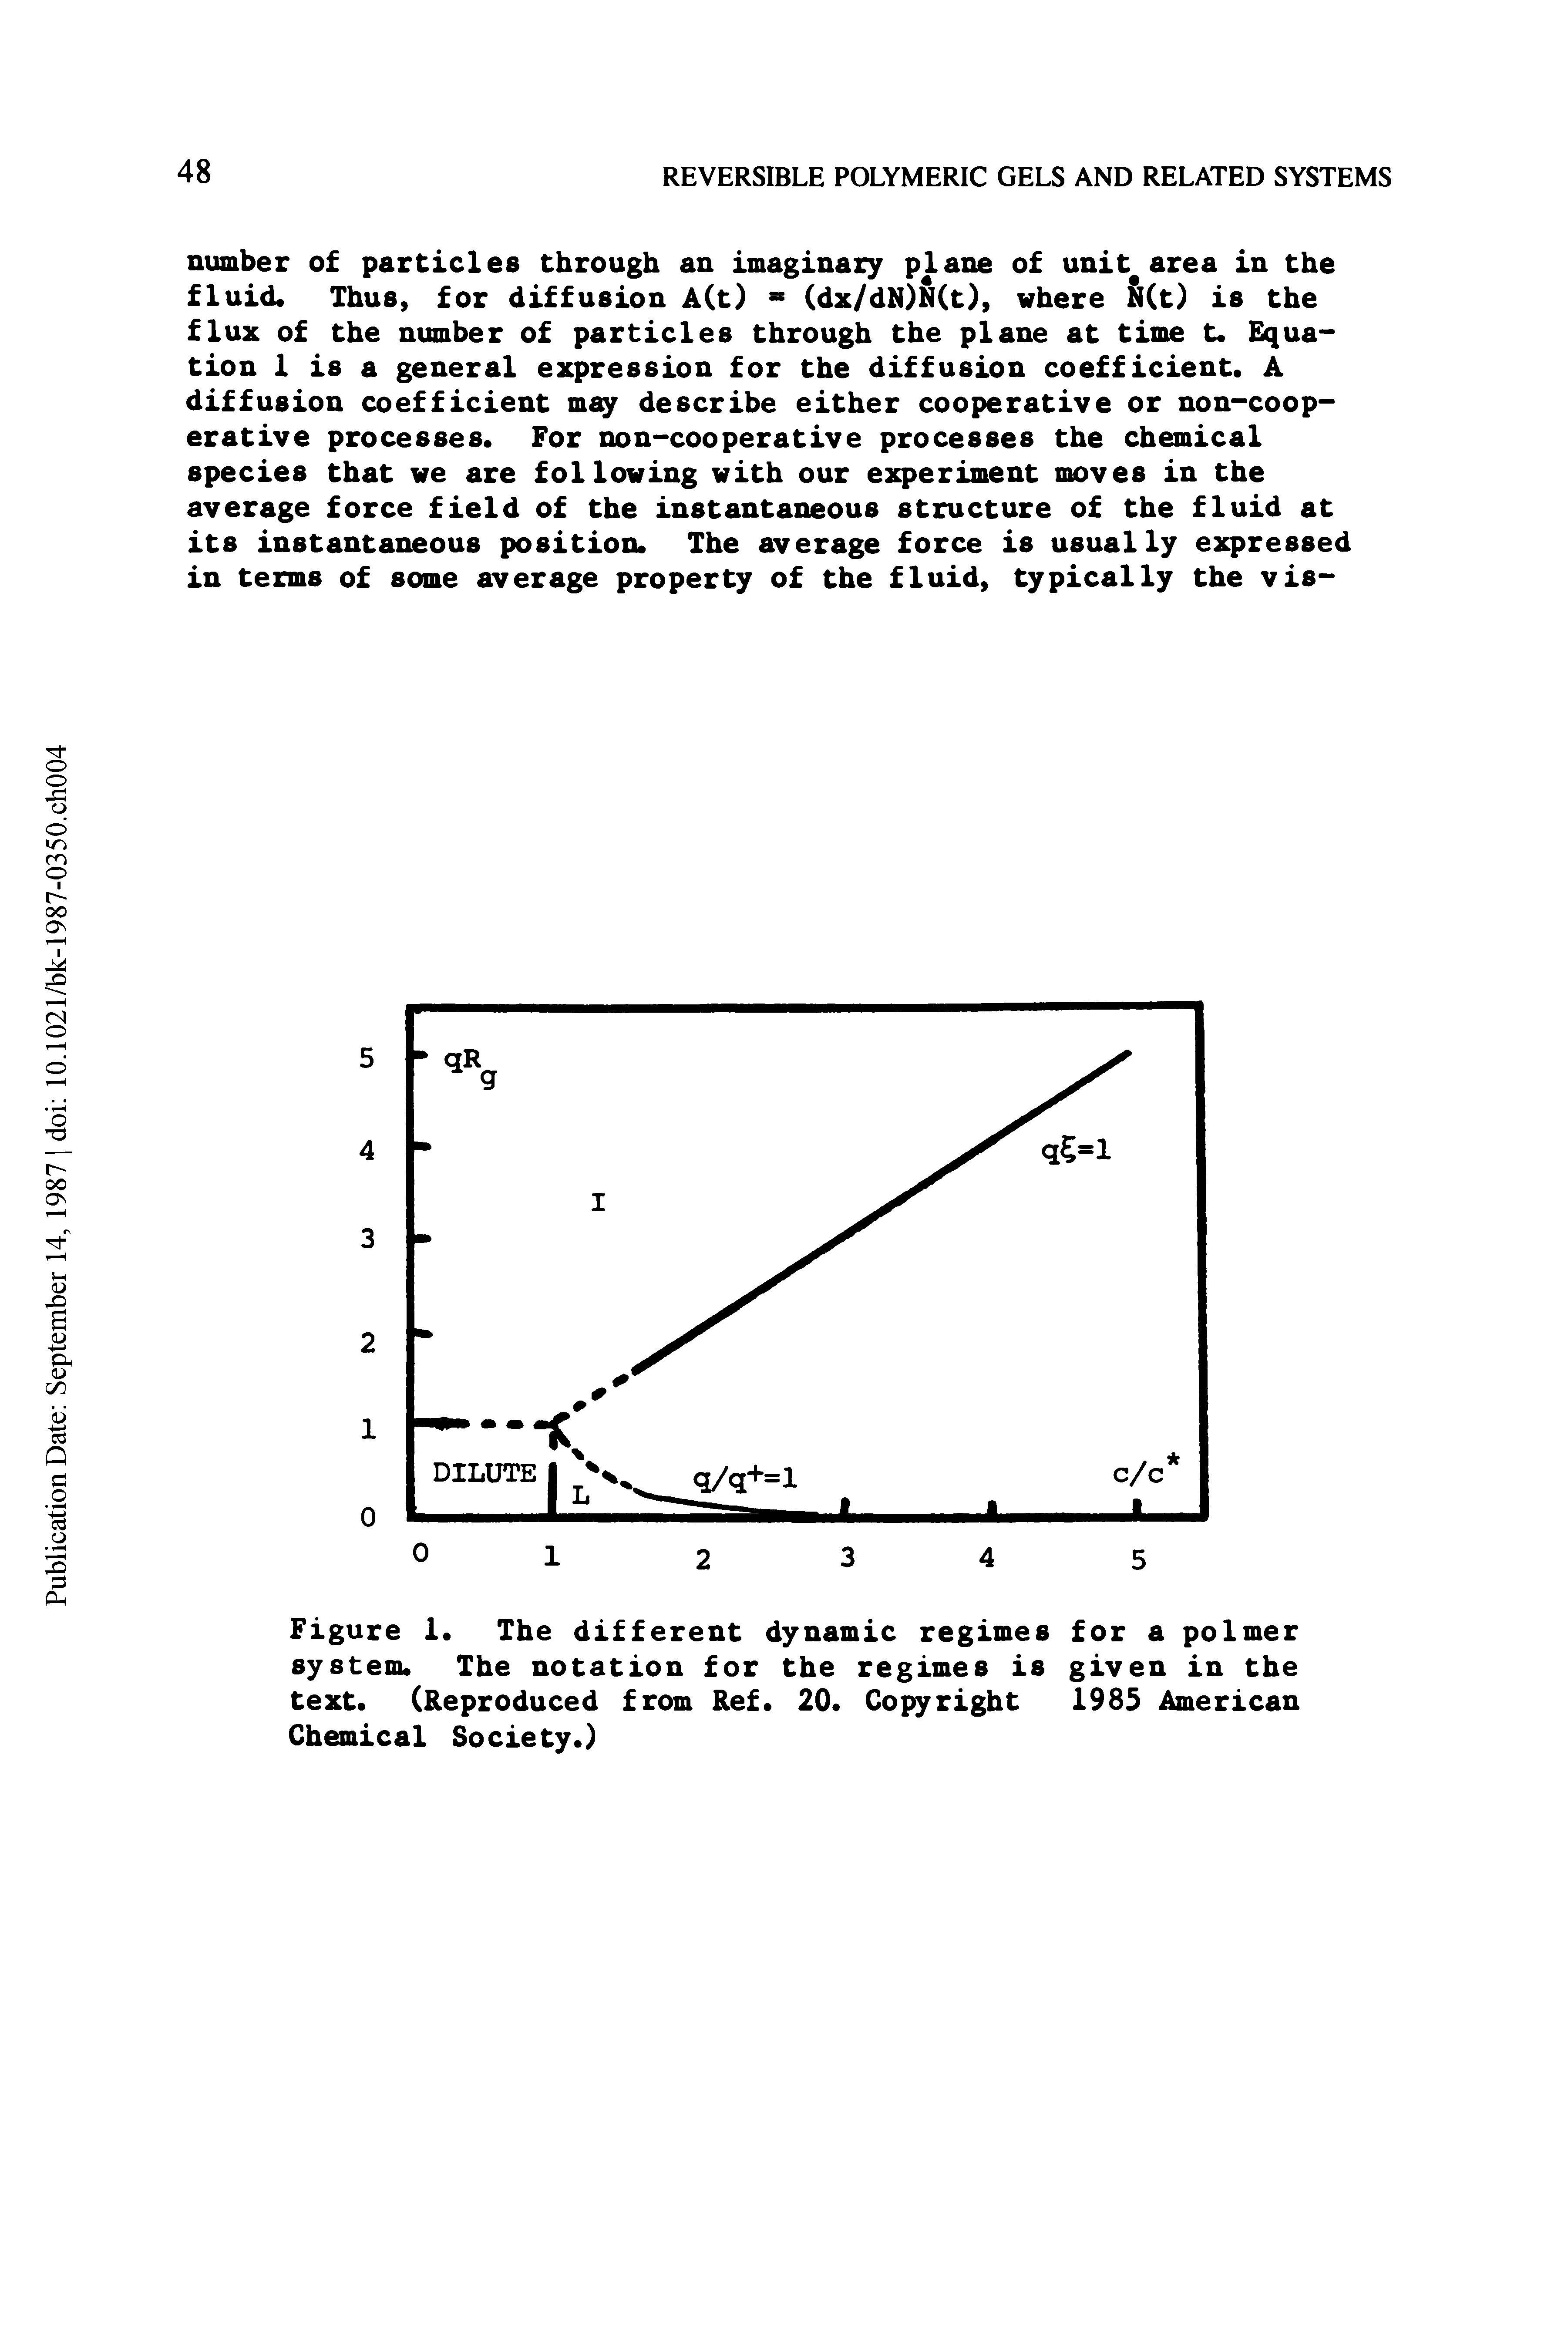 Figure 1. The different dynamic regimes for a polmer system. The notation for the regimes is given in the text. (Reproduced from Ref. 20. Copyright 1983 American Chemical Society.)...